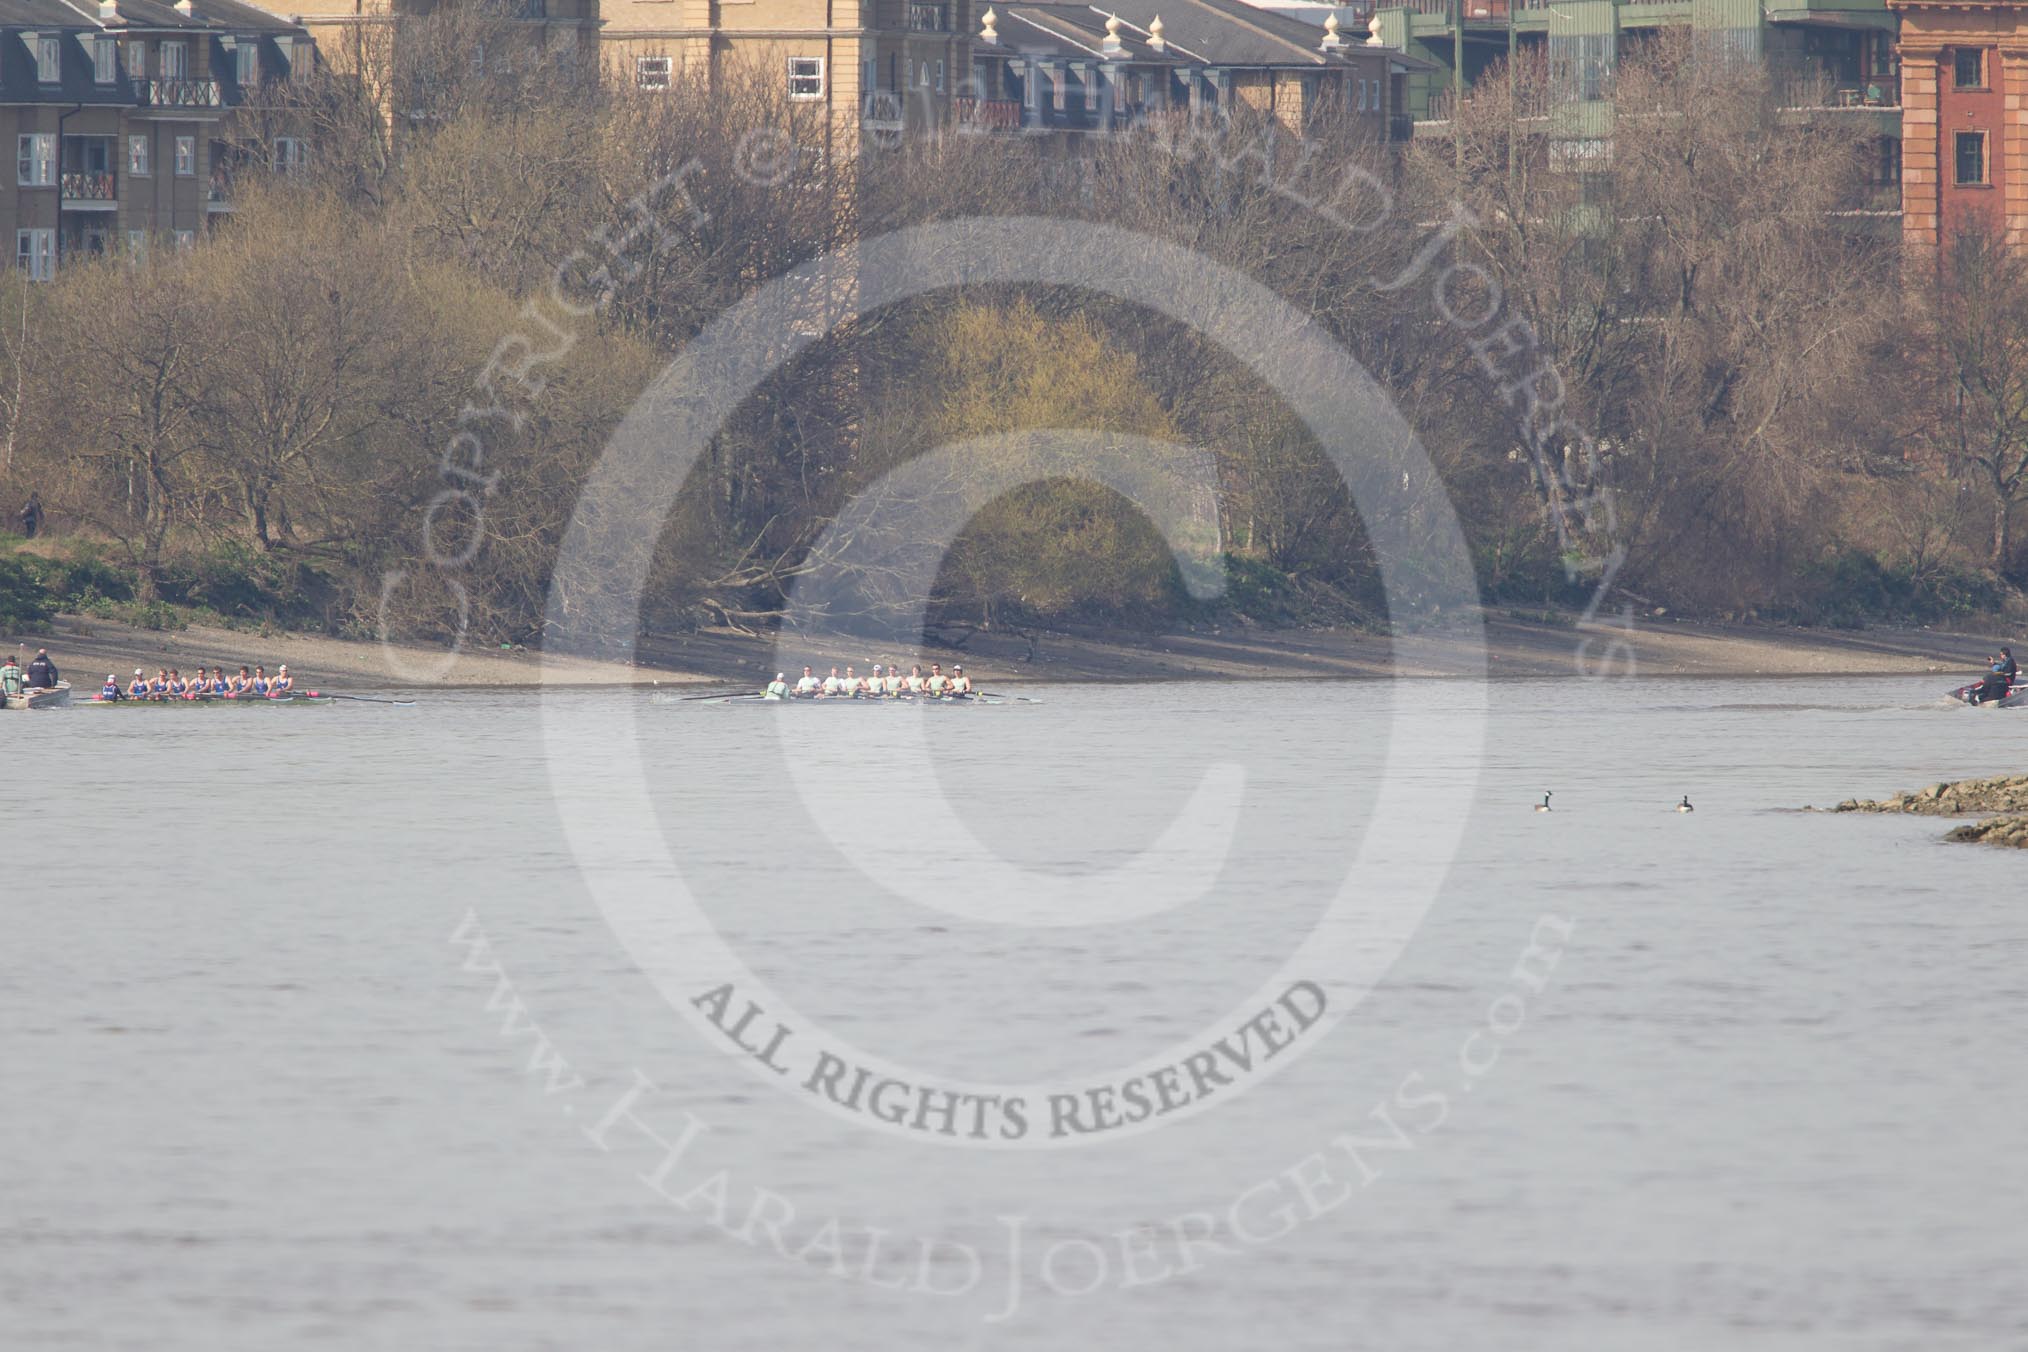 The Boat Race season 2012 - fixture CUBC vs Molesey BC: CUBC Goldie v Imperial fixture: Goldie leading towards Harrods Repository, behind the Imperial boat umpire Simon Harris..




on 25 March 2012 at 14:49, image #73